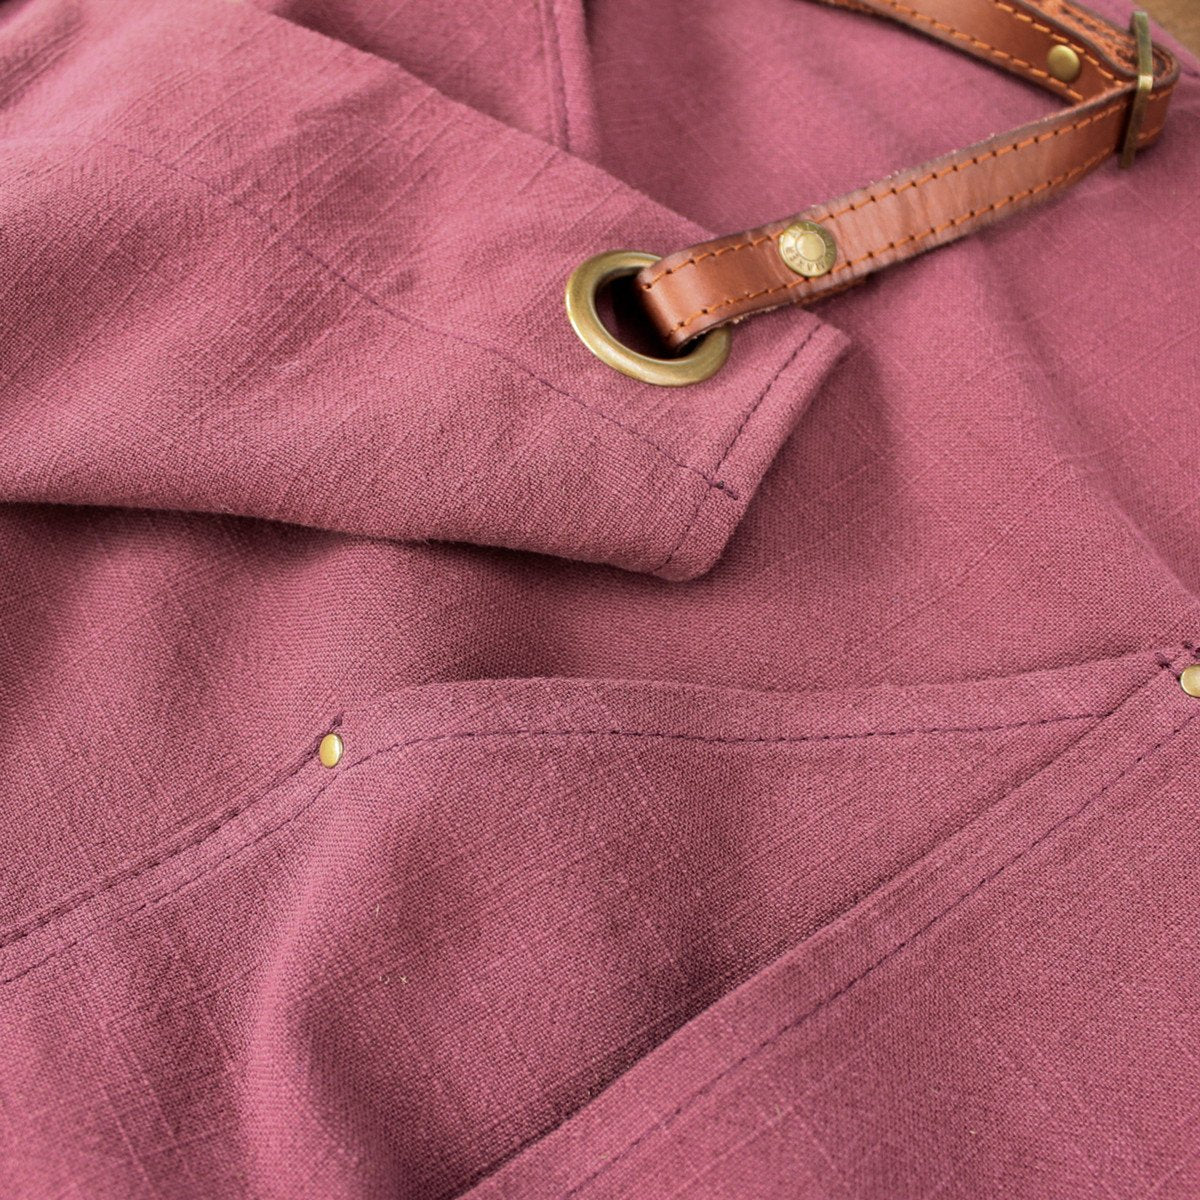 Beautiful Burgundy linen Apron Close up of Pocket and Leather Straps 